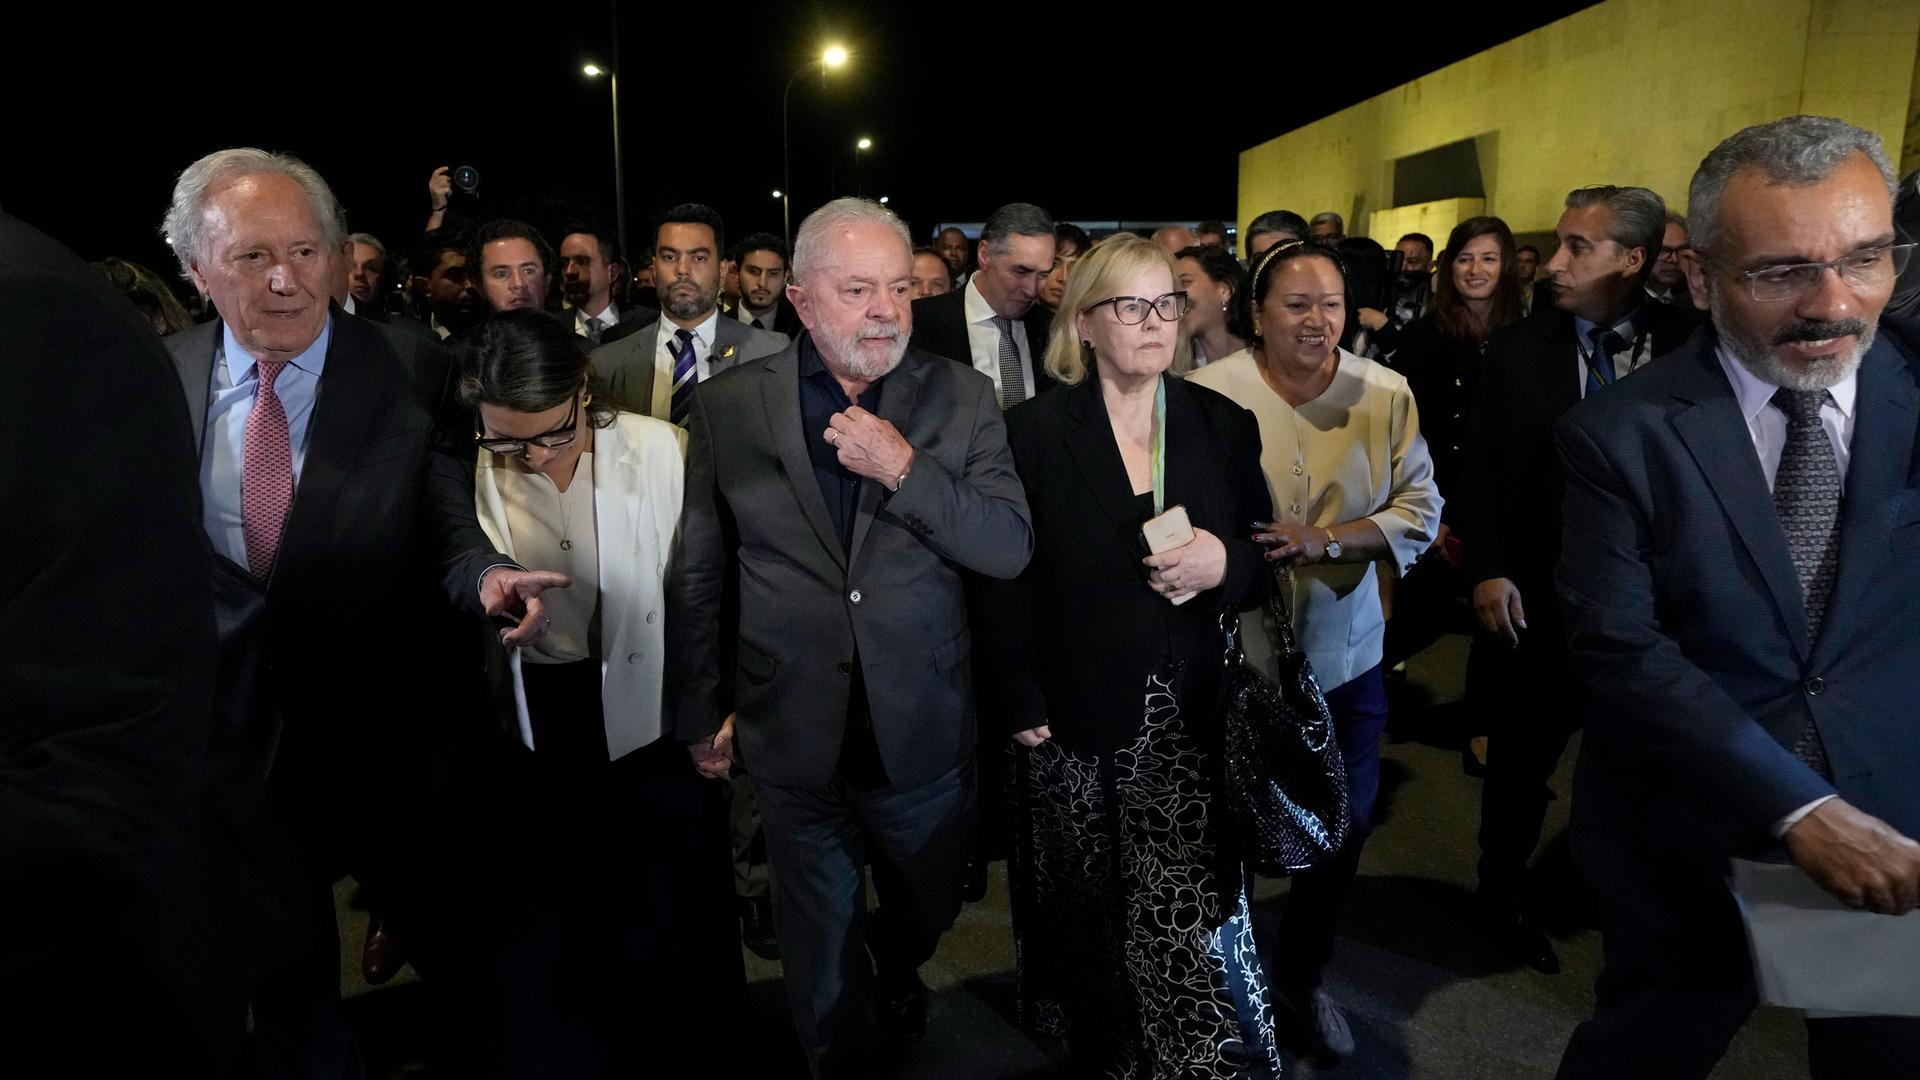 Brazil's President Luiz Inacio Lula da Silva, center, President of the Supreme Court Rosa Weber, center right, are accompanied by governors and ministers for an inspection visit and support for the Supreme Court headquarters.